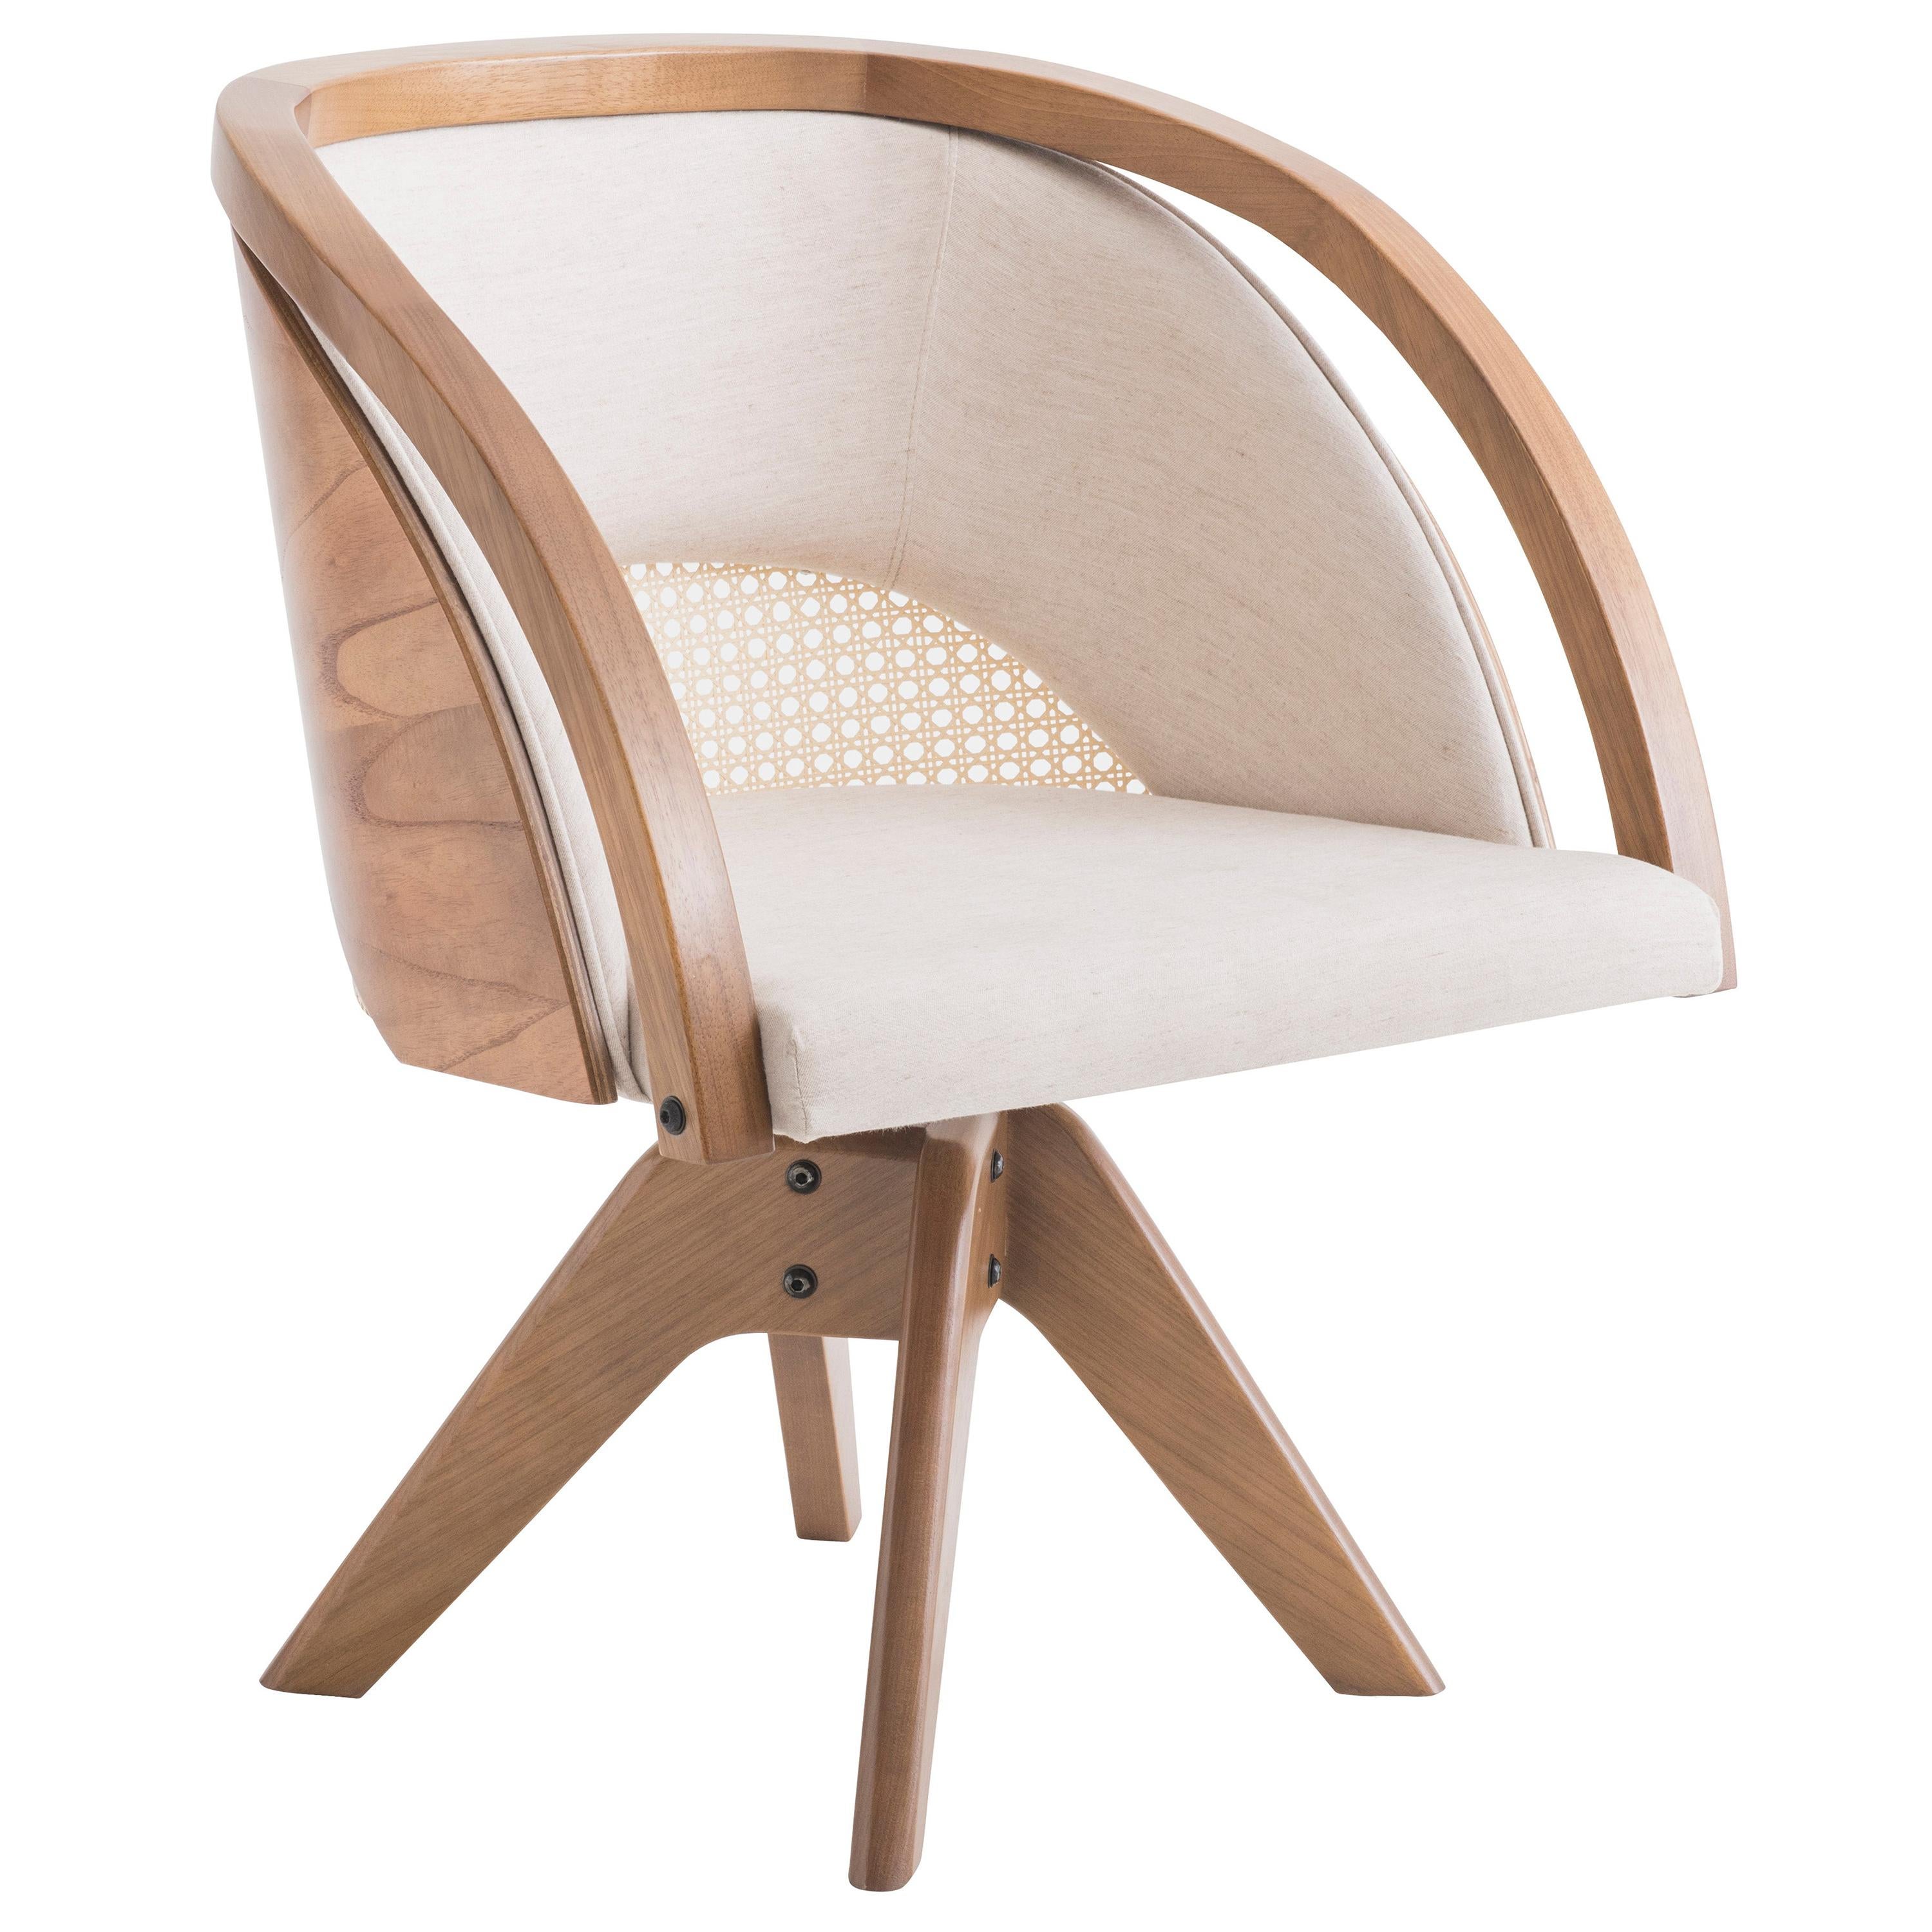 A pice is delicate and practical. The Jasmin armchair has sinuous lines, translating the essence of well-being and wellness to the piece.
It has 4 feet in natural wood swivel that makes a practical piece and facilitates the circulation of the